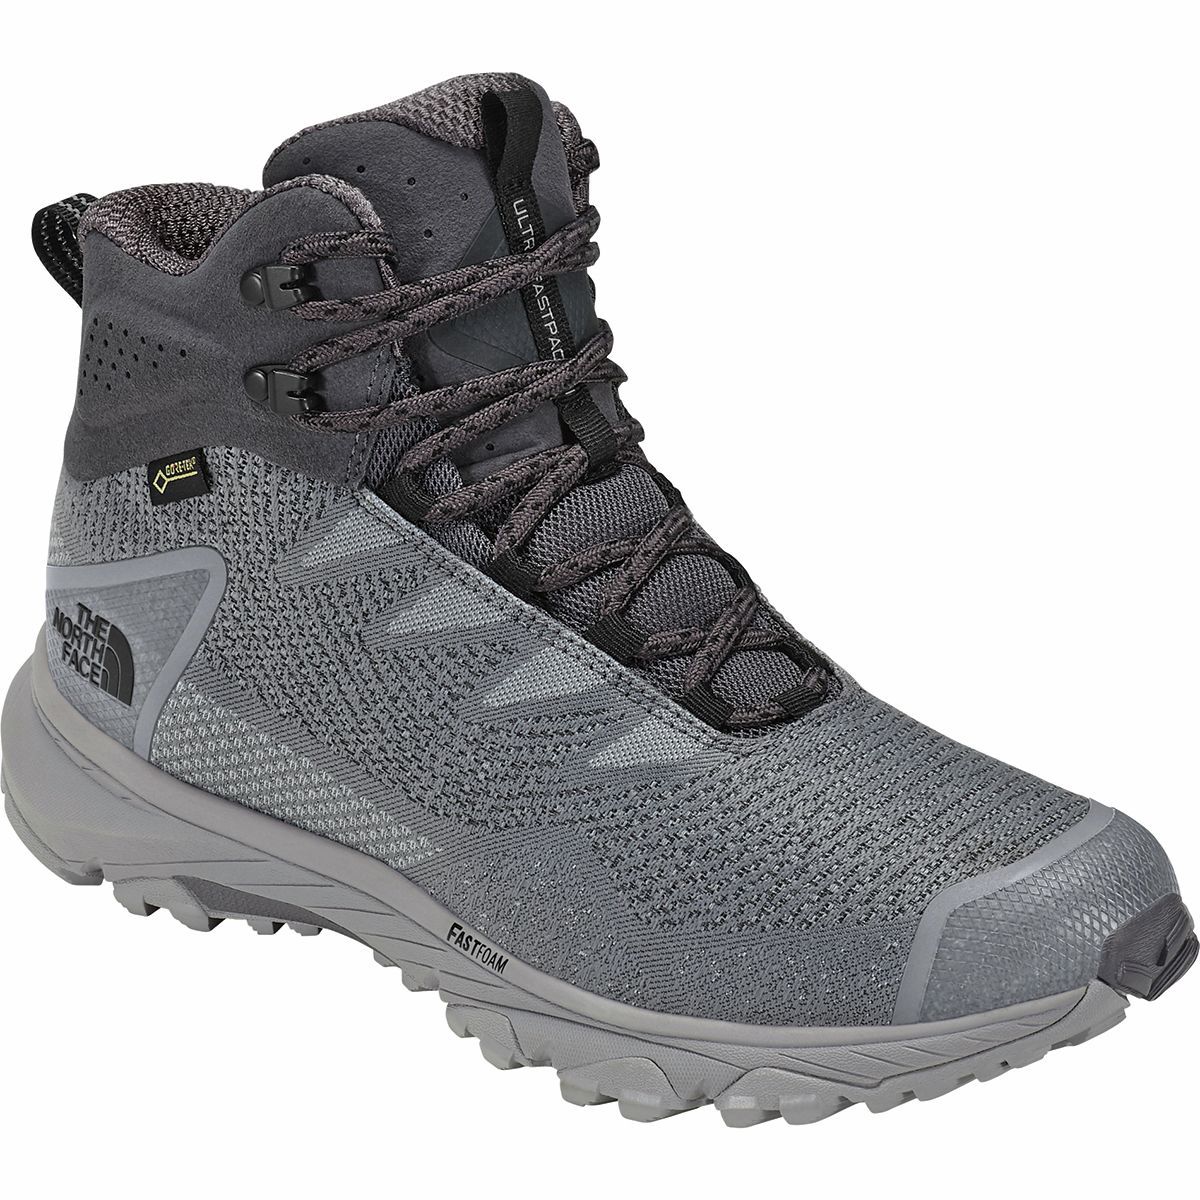 The North Face Ultra Fastpack III Mid GTX Boots